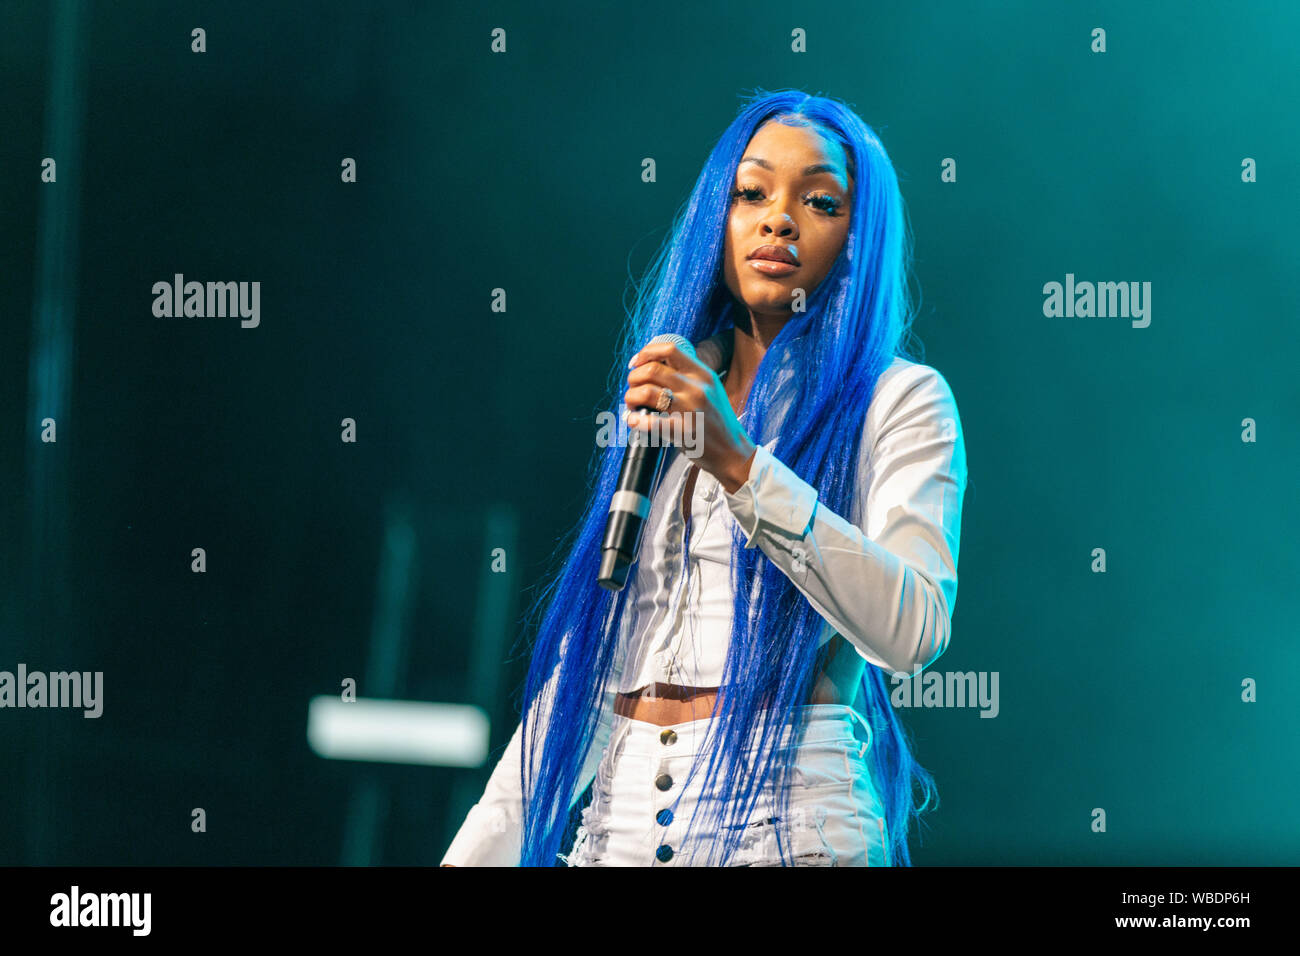 https://c8.alamy.com/comp/WBDP6H/august-24-2019-chicago-illinois-us-singer-ann-marie-slater-during-the-wgci-summer-jam-at-wintrust-arena-in-chicago-illinois-credit-image-daniel-desloverzuma-wire-WBDP6H.jpg